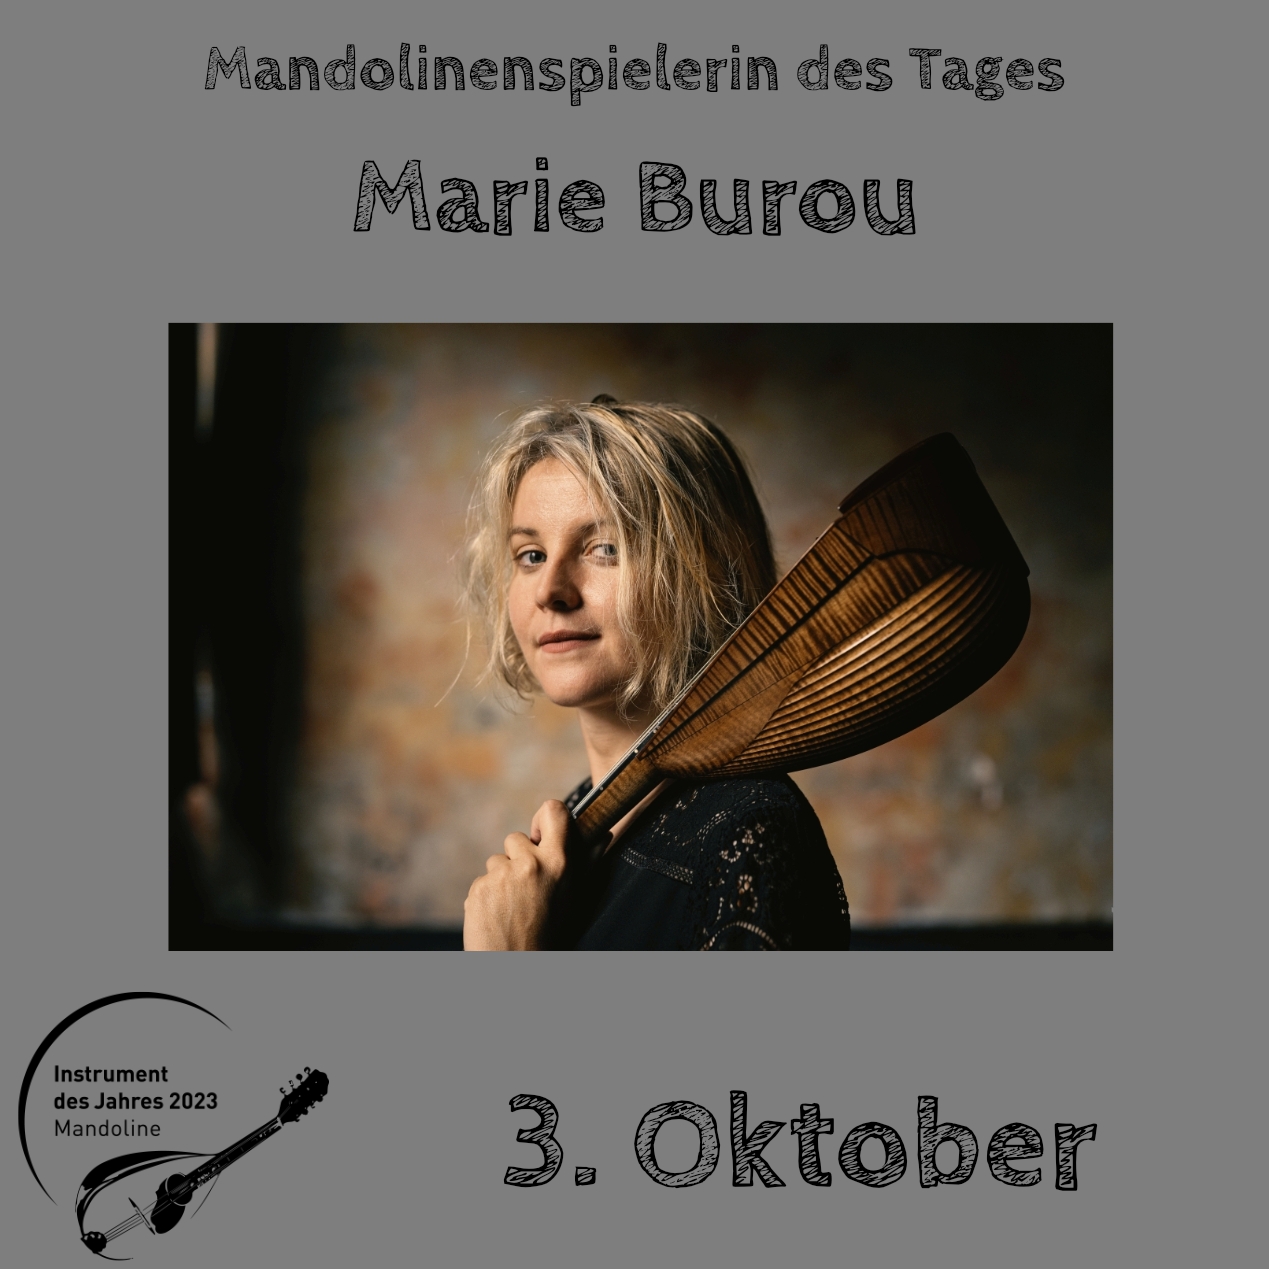 You are currently viewing 3. Oktober – Marie Burou